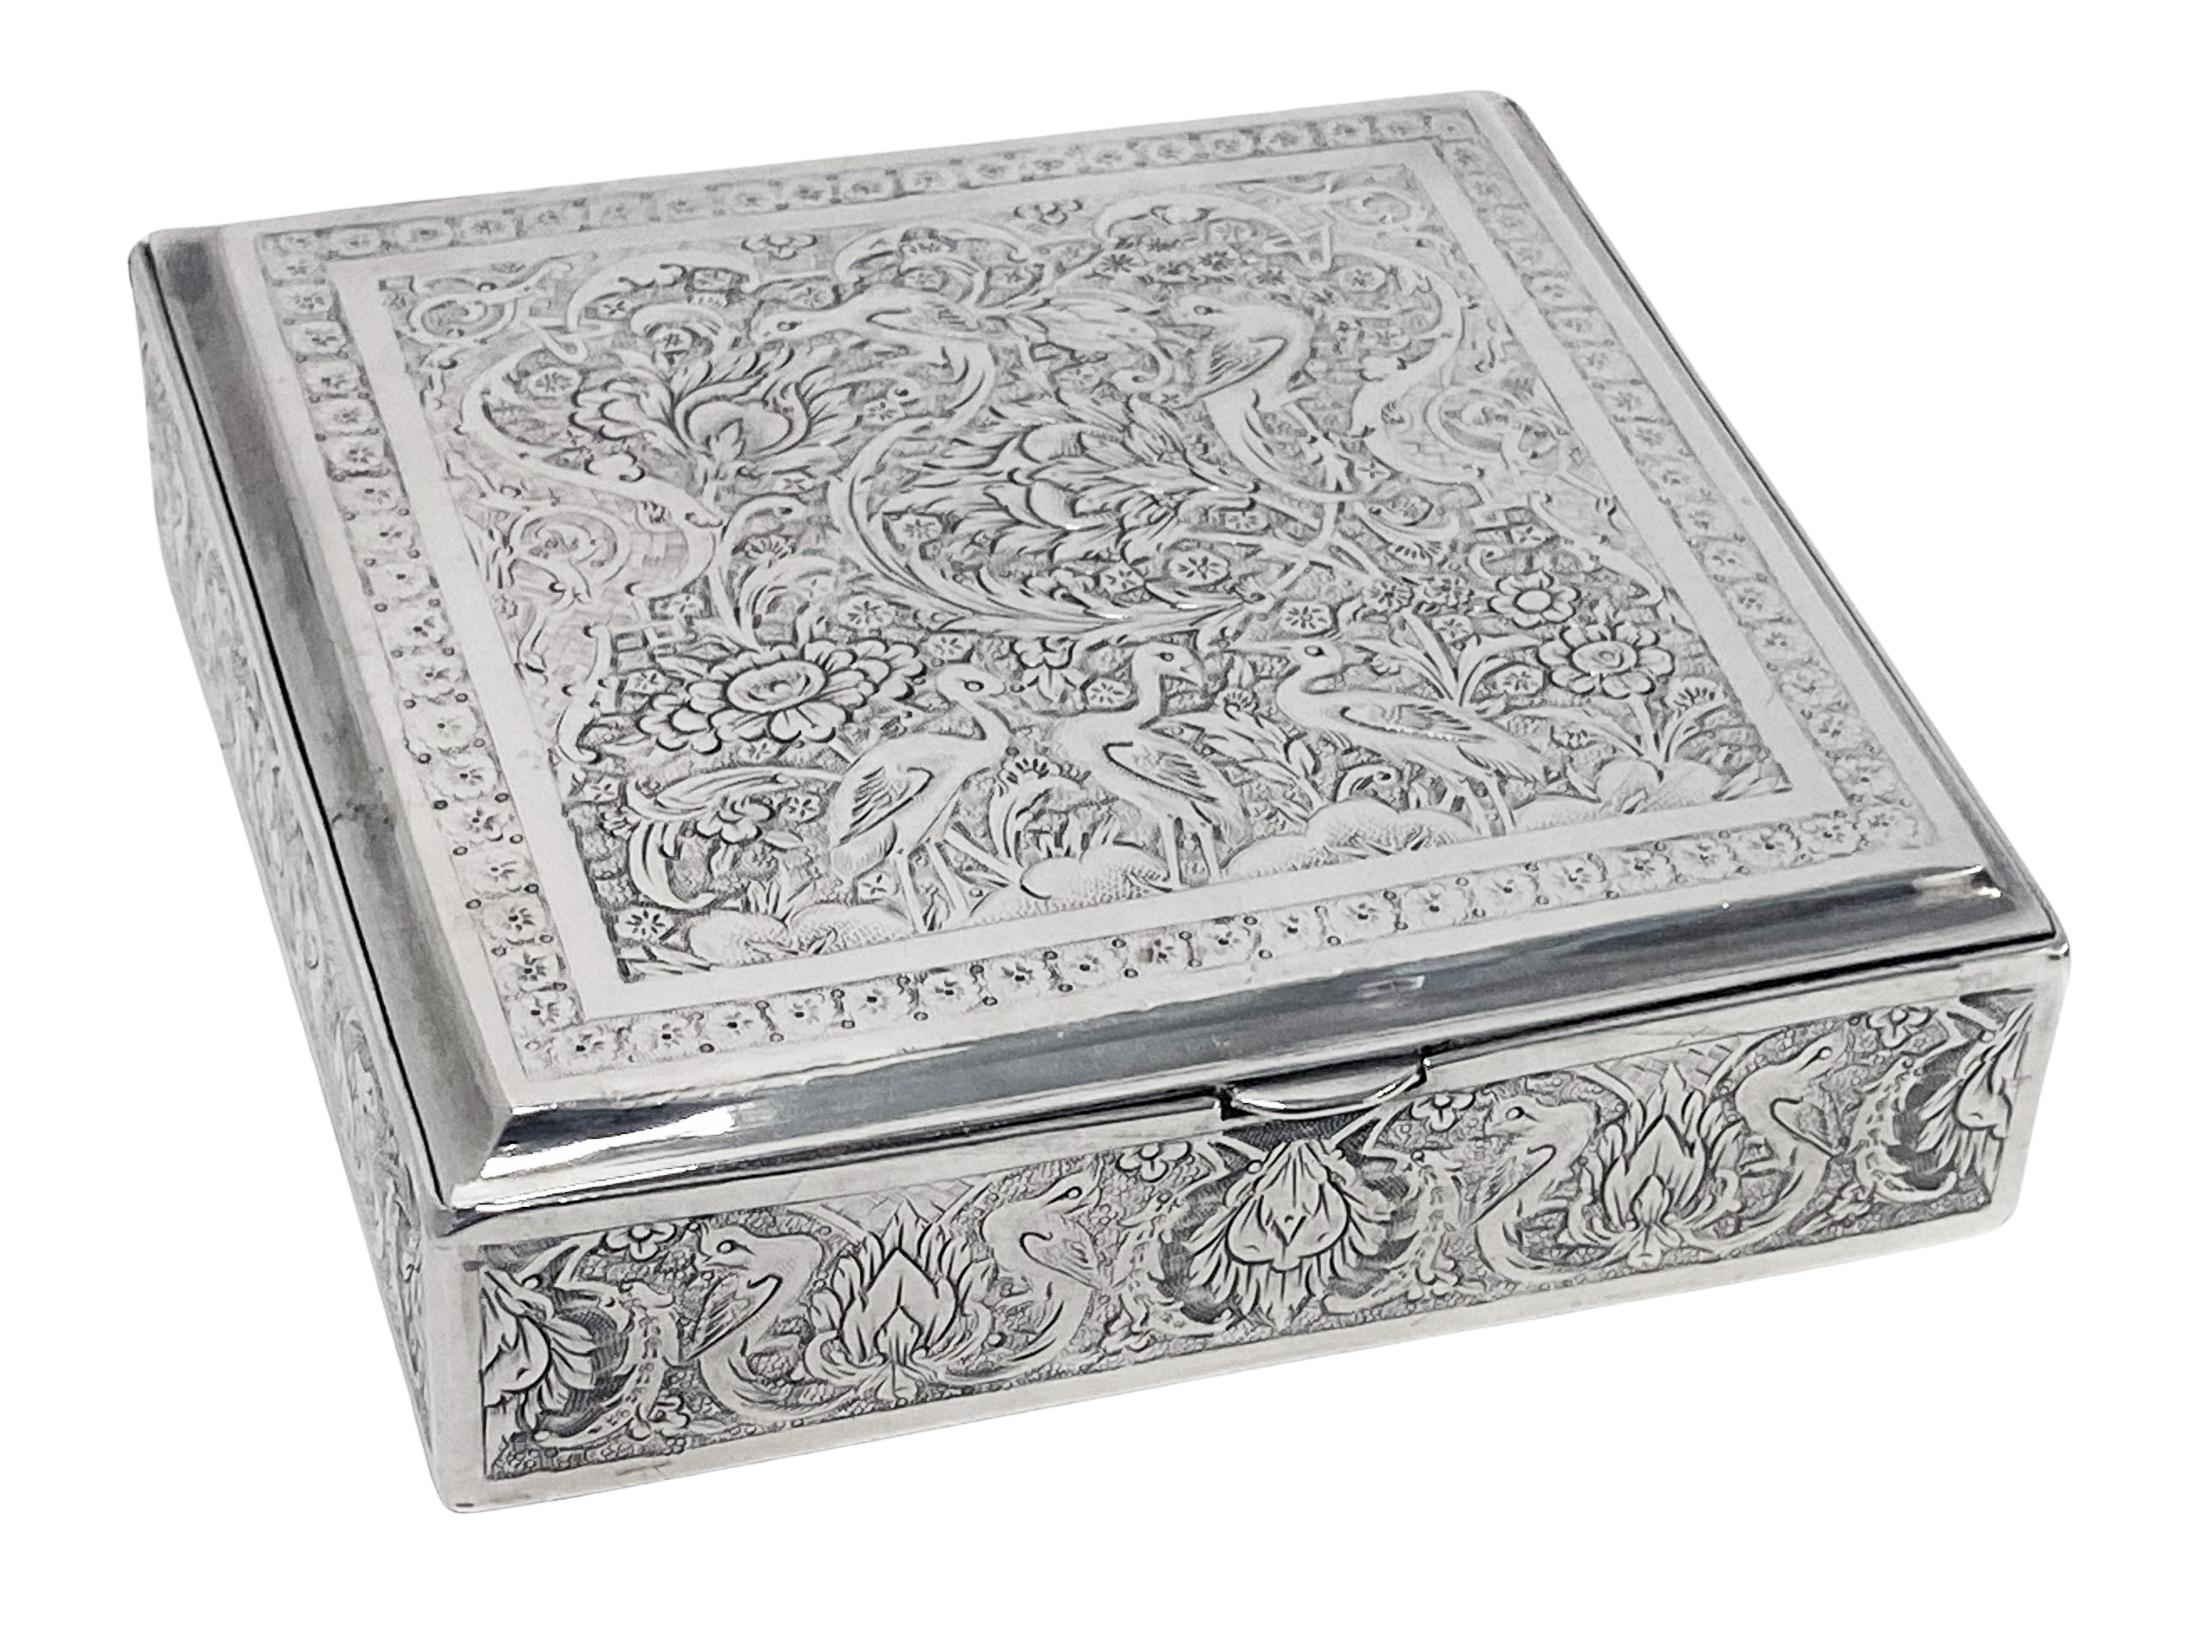 Antique Persian Silver Box C.1920. The case beautifully chased, engraved and decorated with birds, animals and foliage. Persian marks to interior. Measures: 3.40 inches square x 0.90 inches height. Original lightly gilded interior. Weight: 203